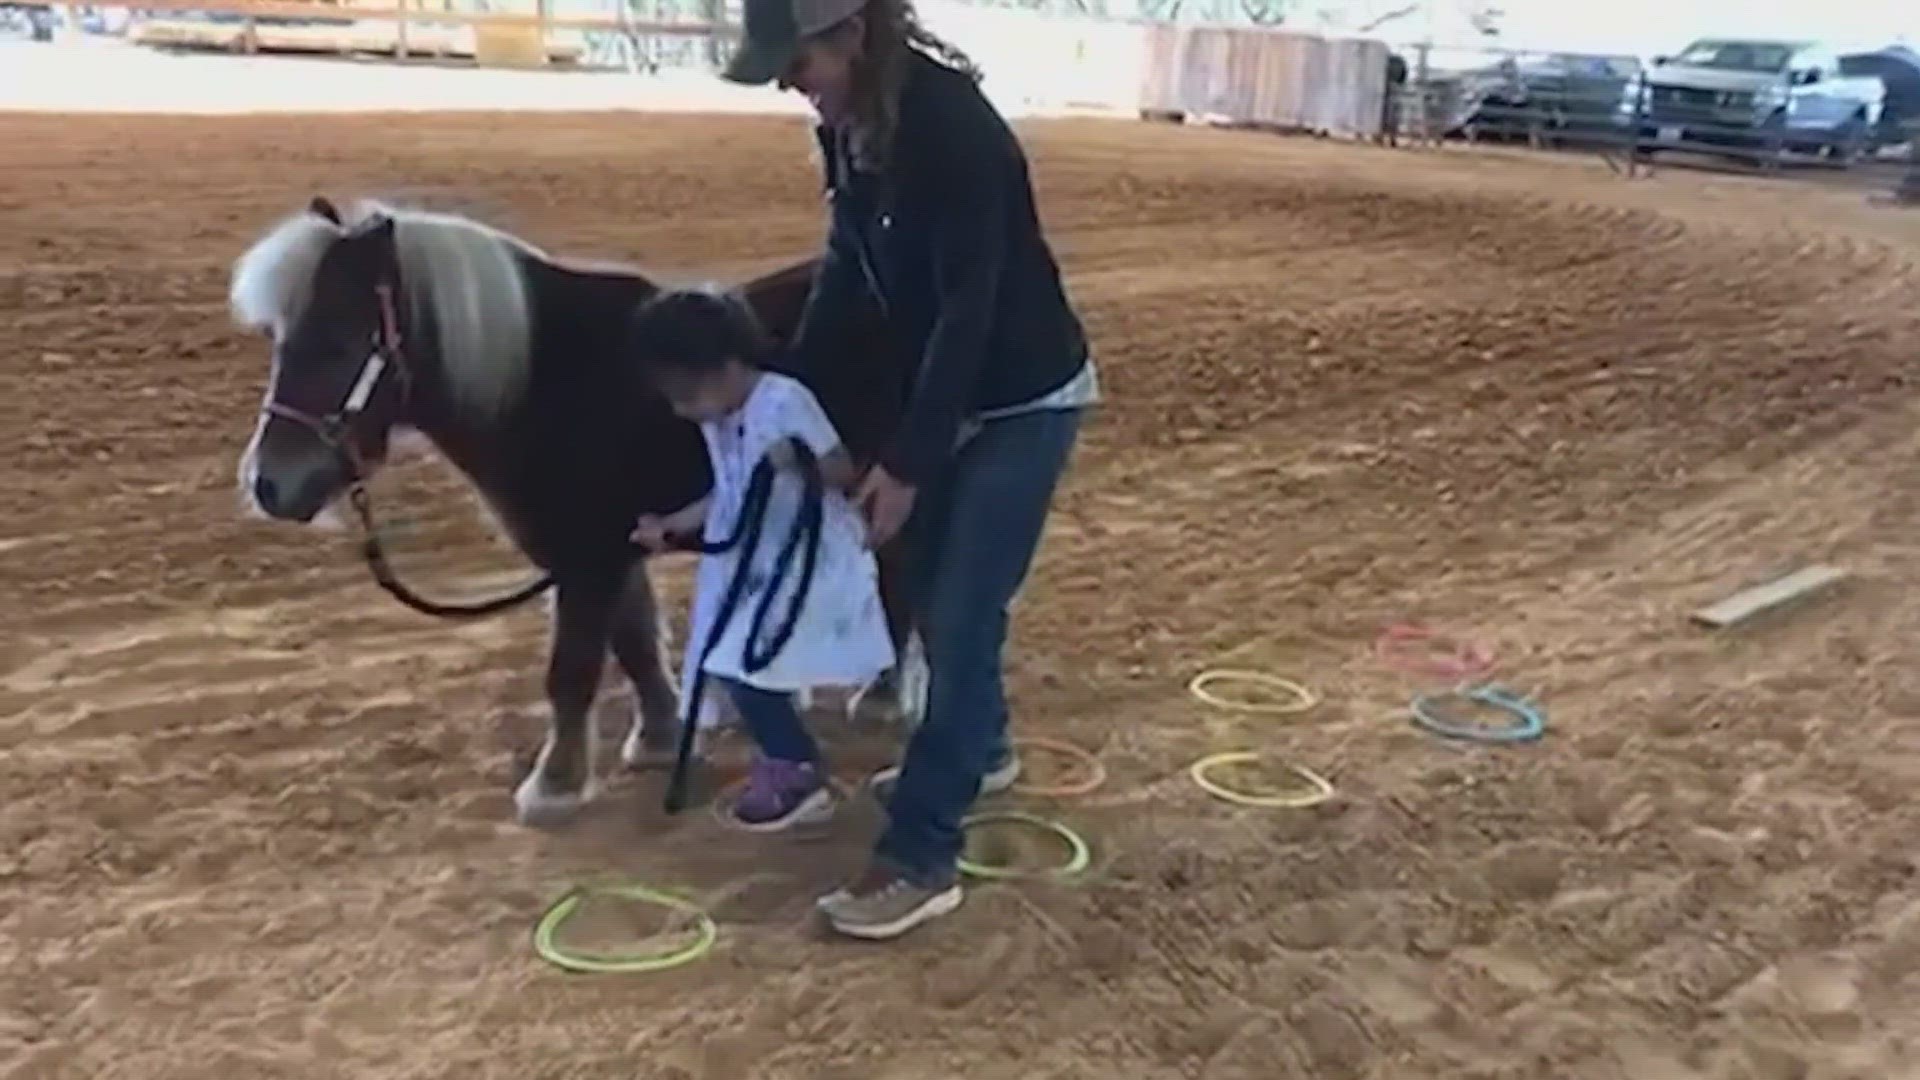 Gus is only three foot tall, but he's a huge help for patients at Hope Reins in Texas.